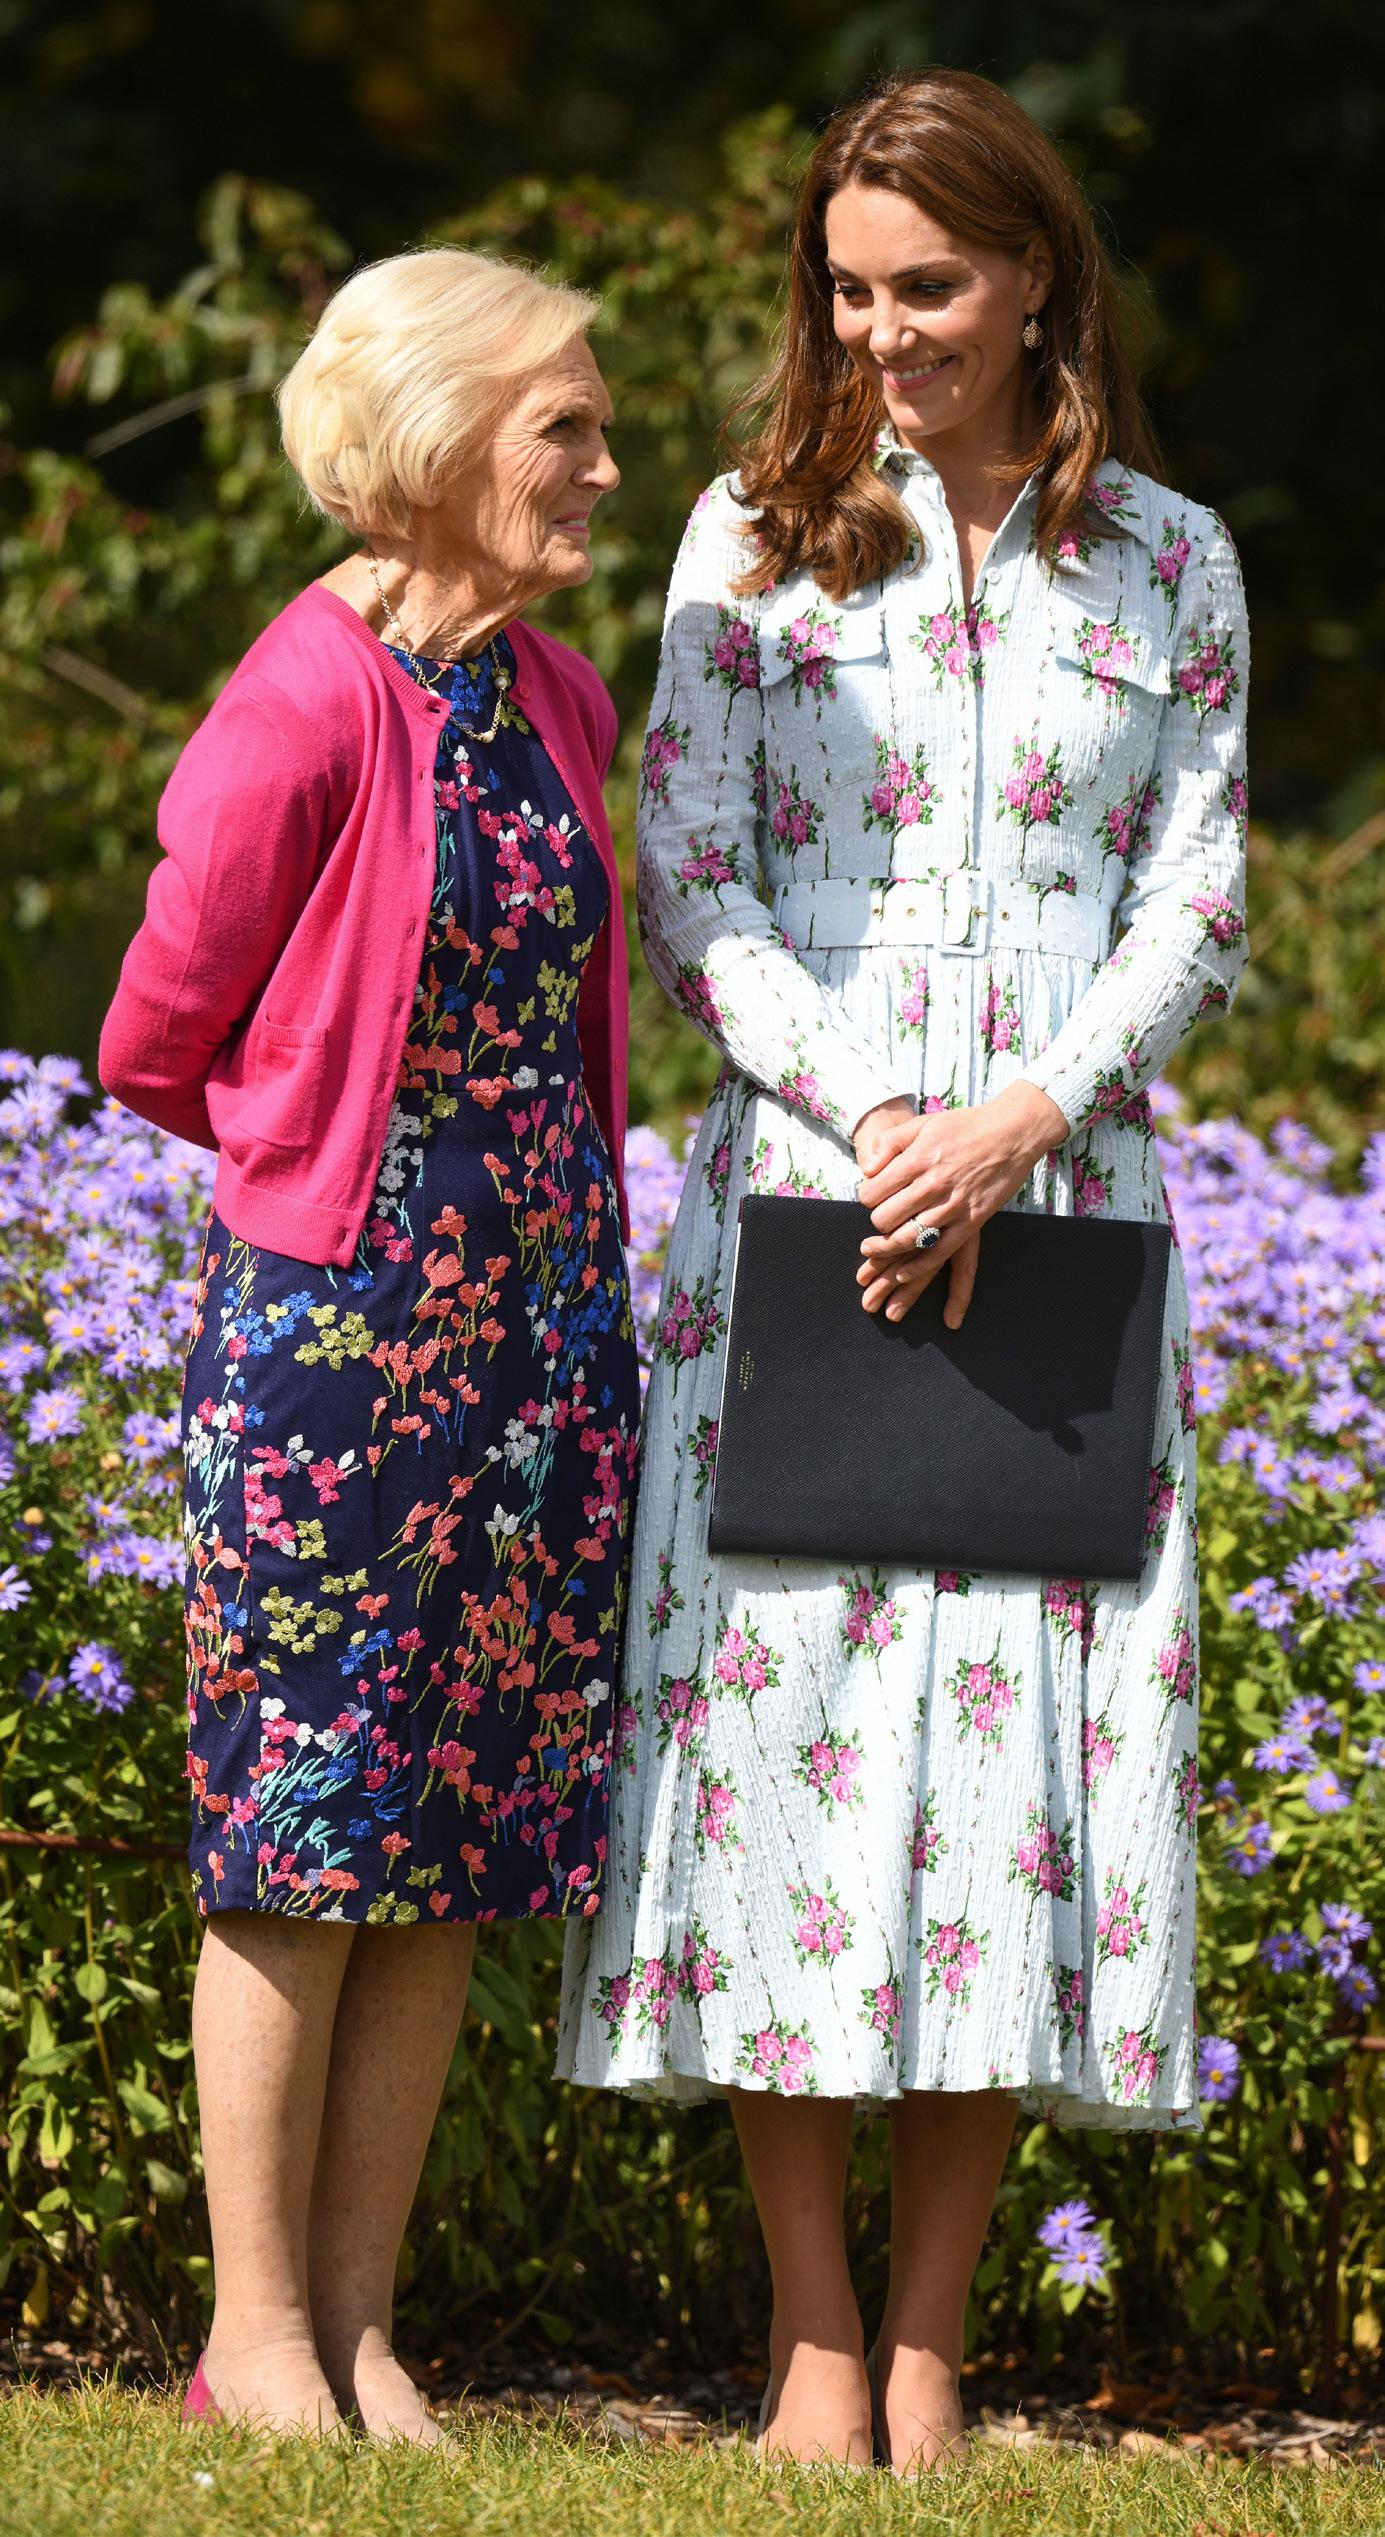 The Duchess of Cambridge and Mary Berry
